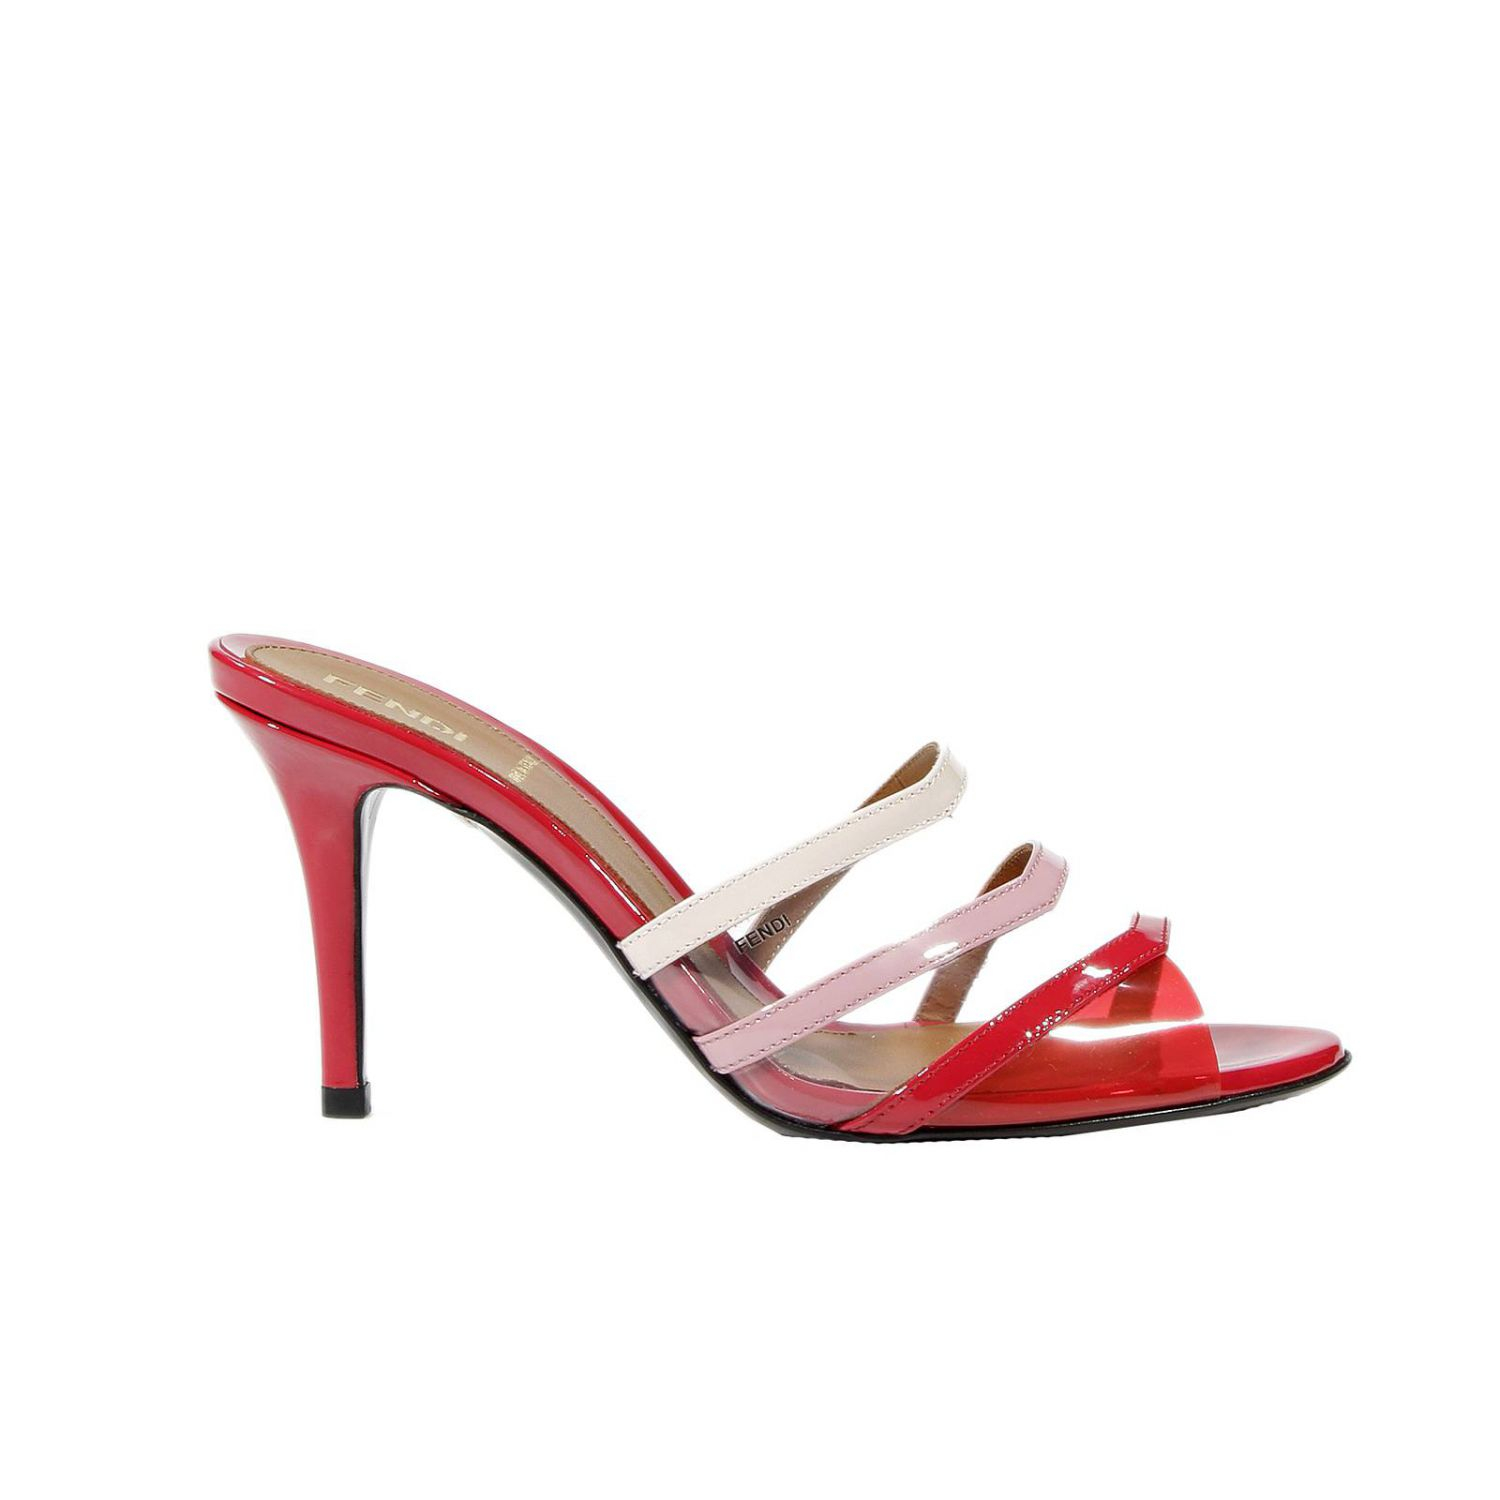 Fendi Shoes Heel 8 Sandal Stripe Patent Color in Red | Lyst